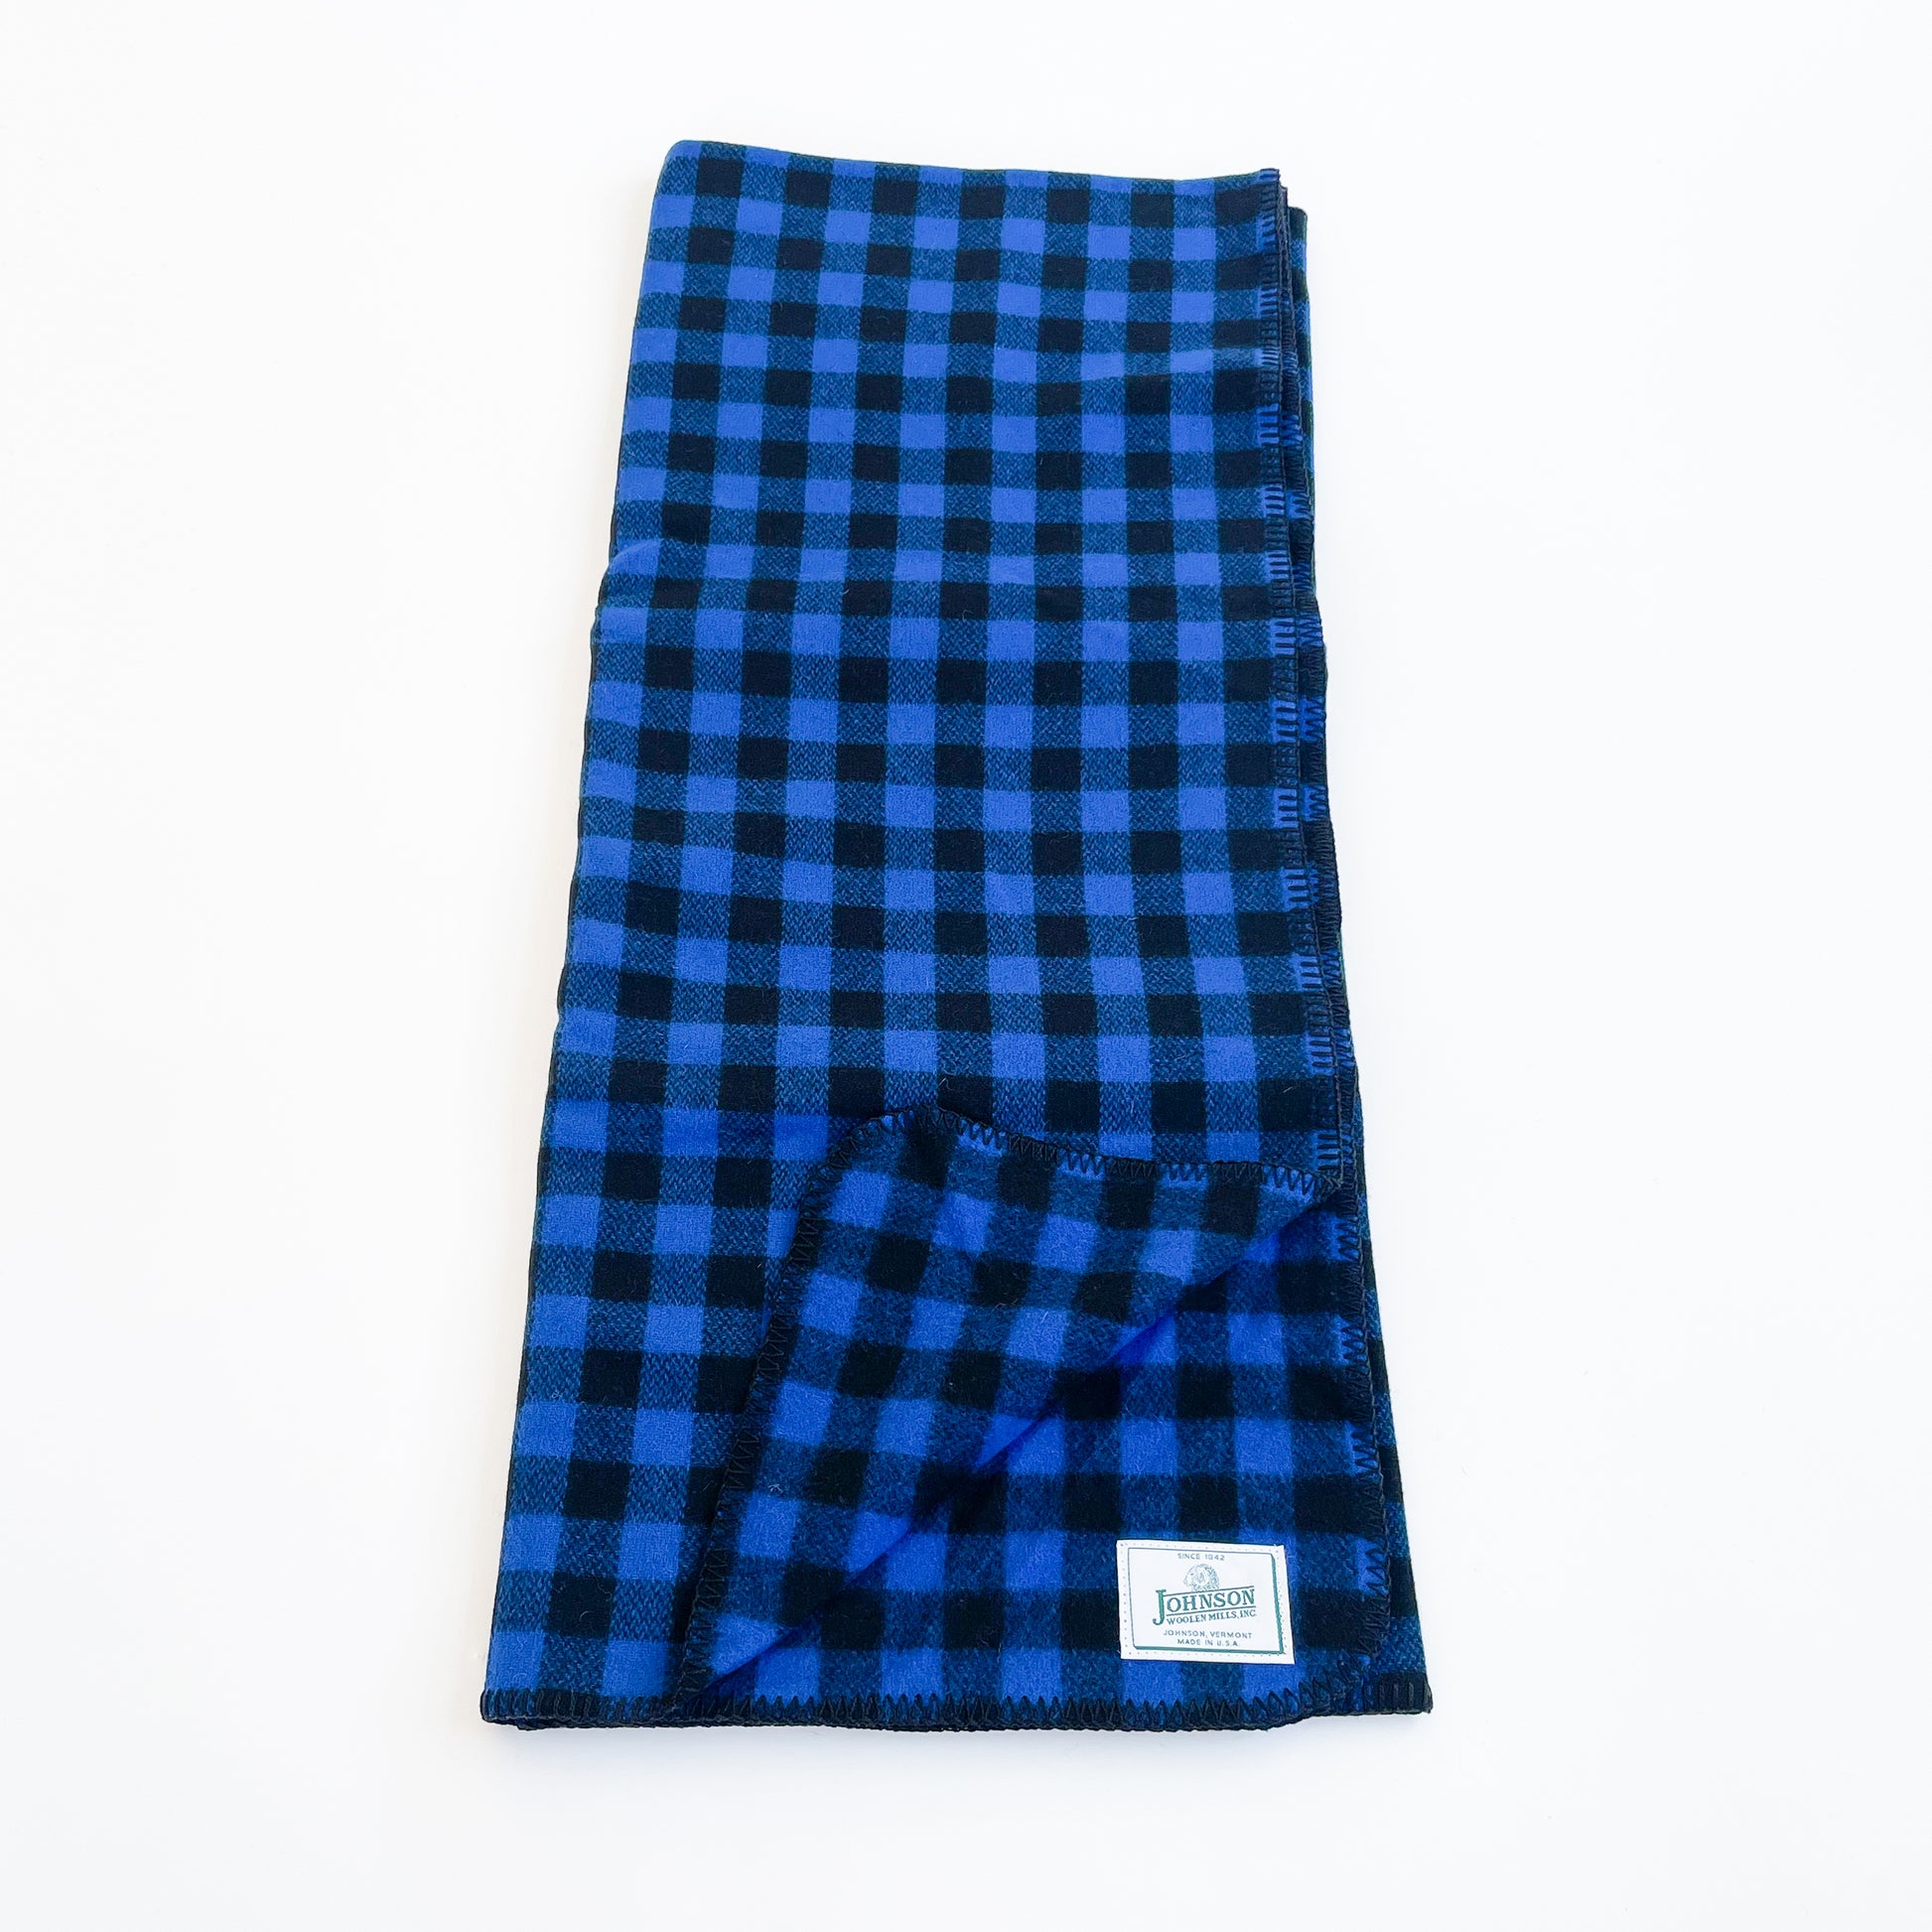 Johnson Woolen Mills throws Bluecheck, Blue & Black buffalo 1 inch squares unfolded front view